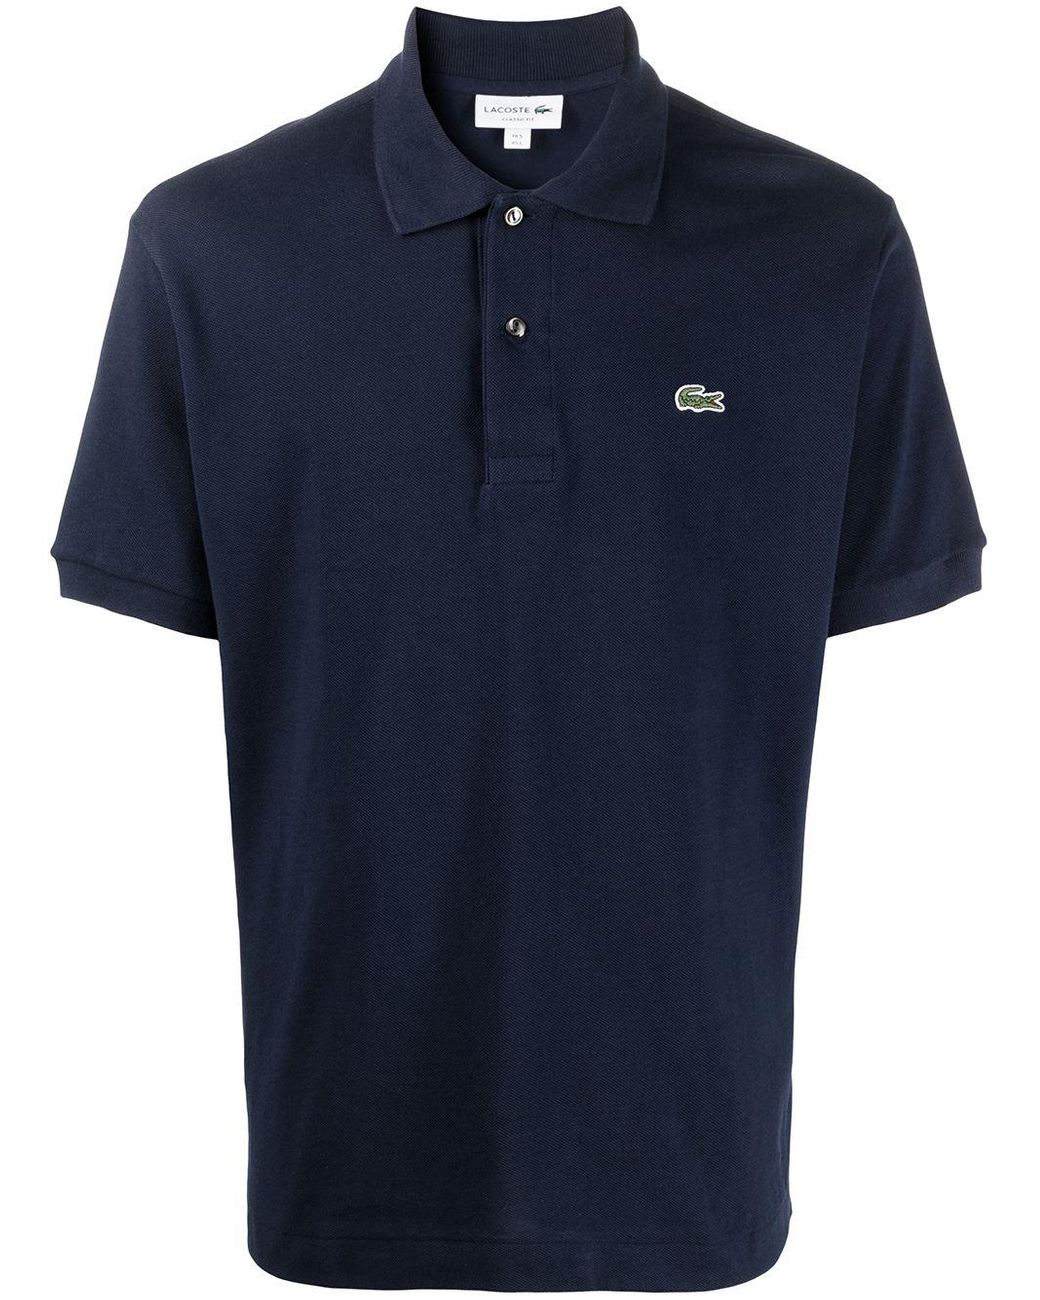 Lacoste Logo Patch Short-sleeved Polo Shirt in Blue for Men - Lyst